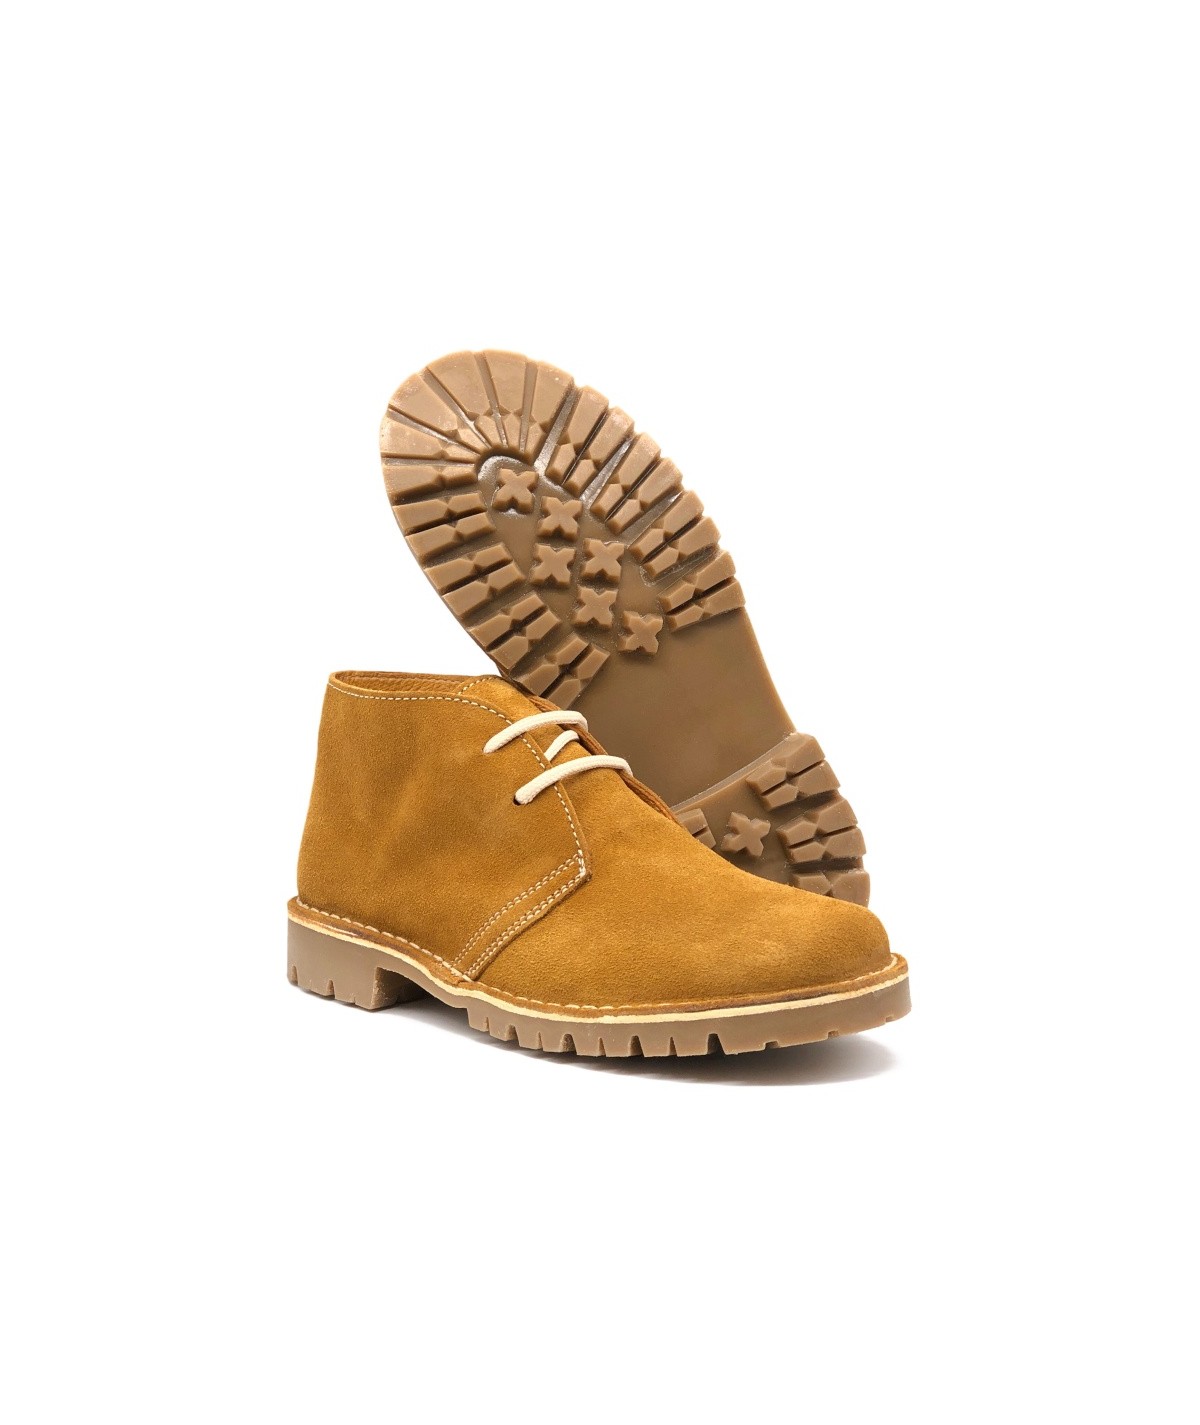 "Caminito del Rey" boots in whiskey color for men